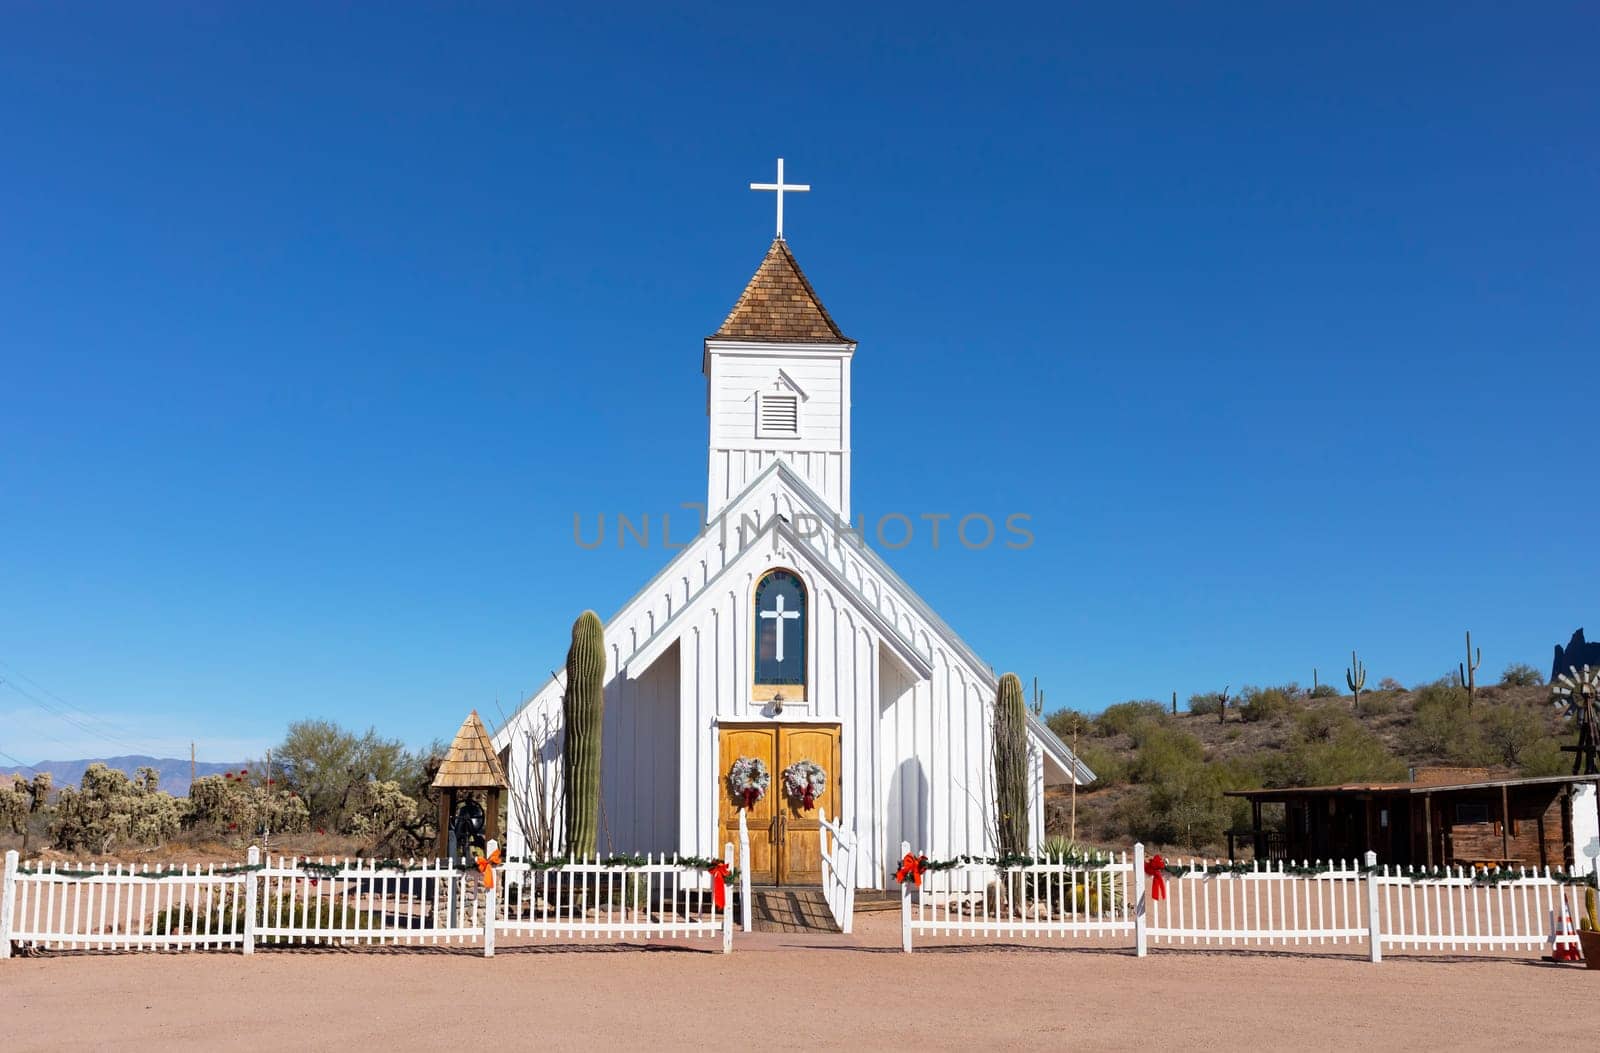 Old Elvis Chapel, Church From Arizona's Mining Days in Superstition Mountains, Near Phoenix, Apache Junction, Ghost Town of Goldfield. Blue Sky, Cactus. Horizontal Plane. High quality photo